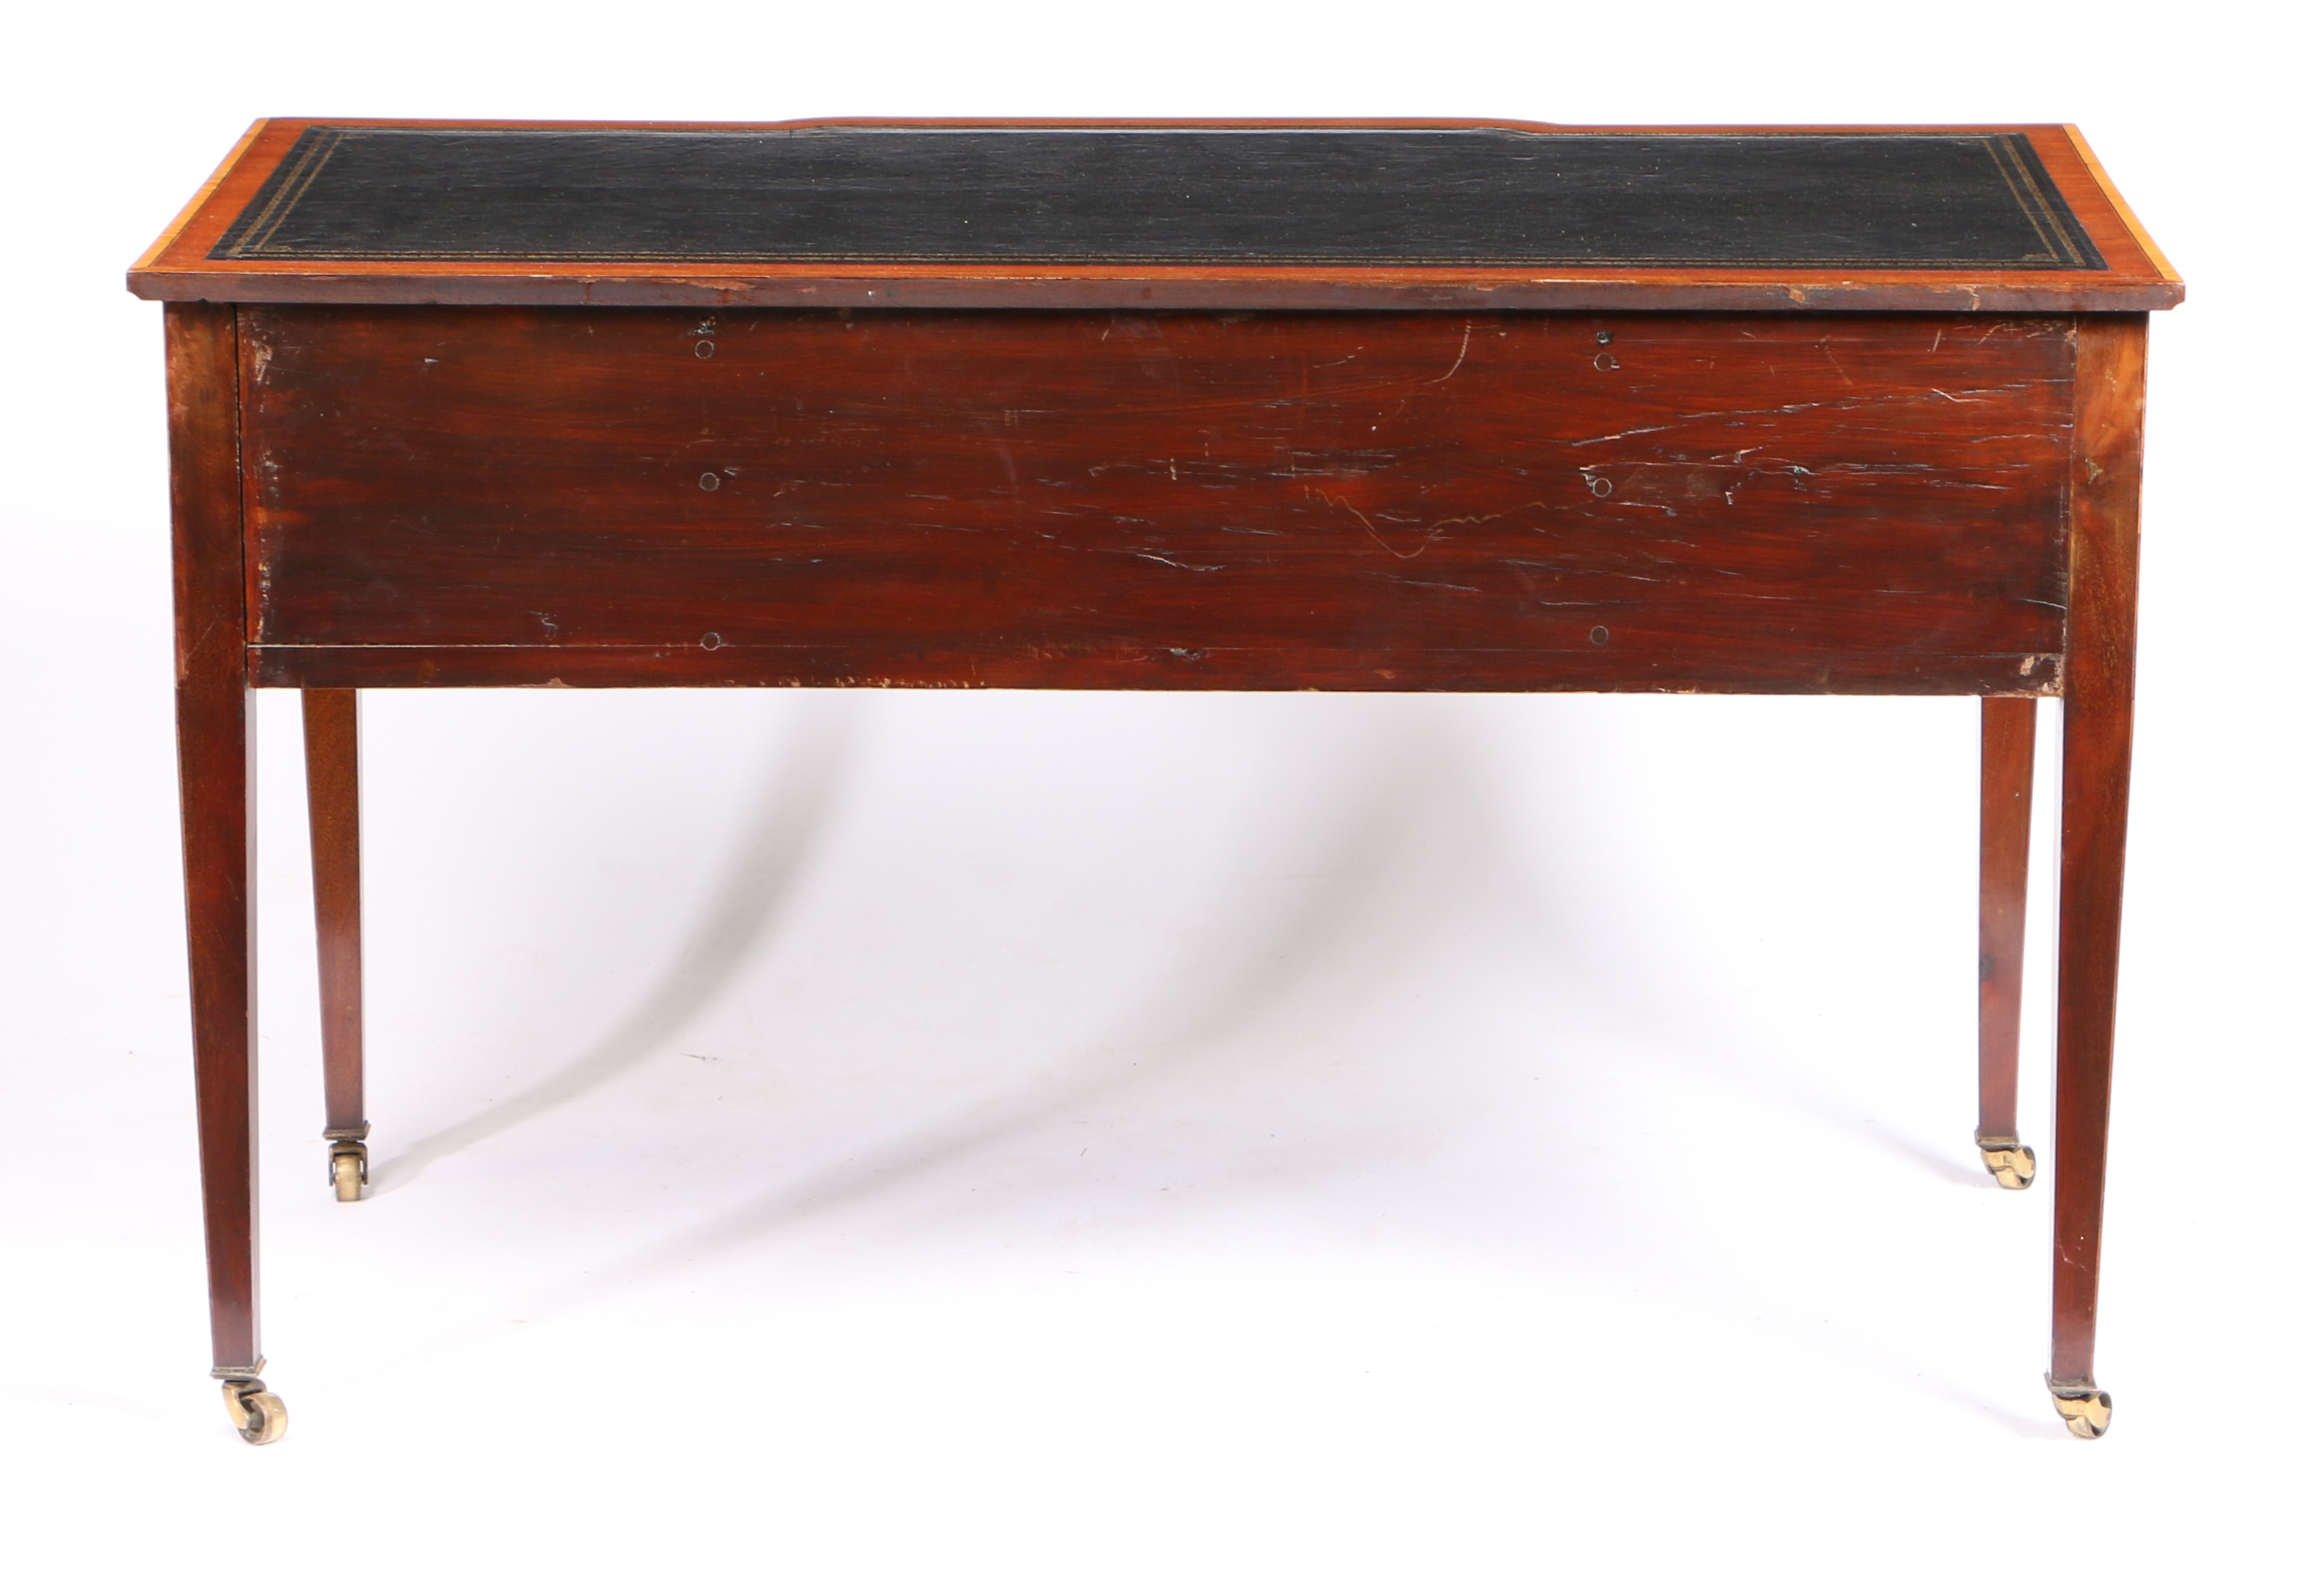 A 19TH CENTURY MAHOGANY AND SATINWOOD INLAID WRITING DESK, IN THE MANNER OF EDWARDS AND ROBERTS. - Image 4 of 4